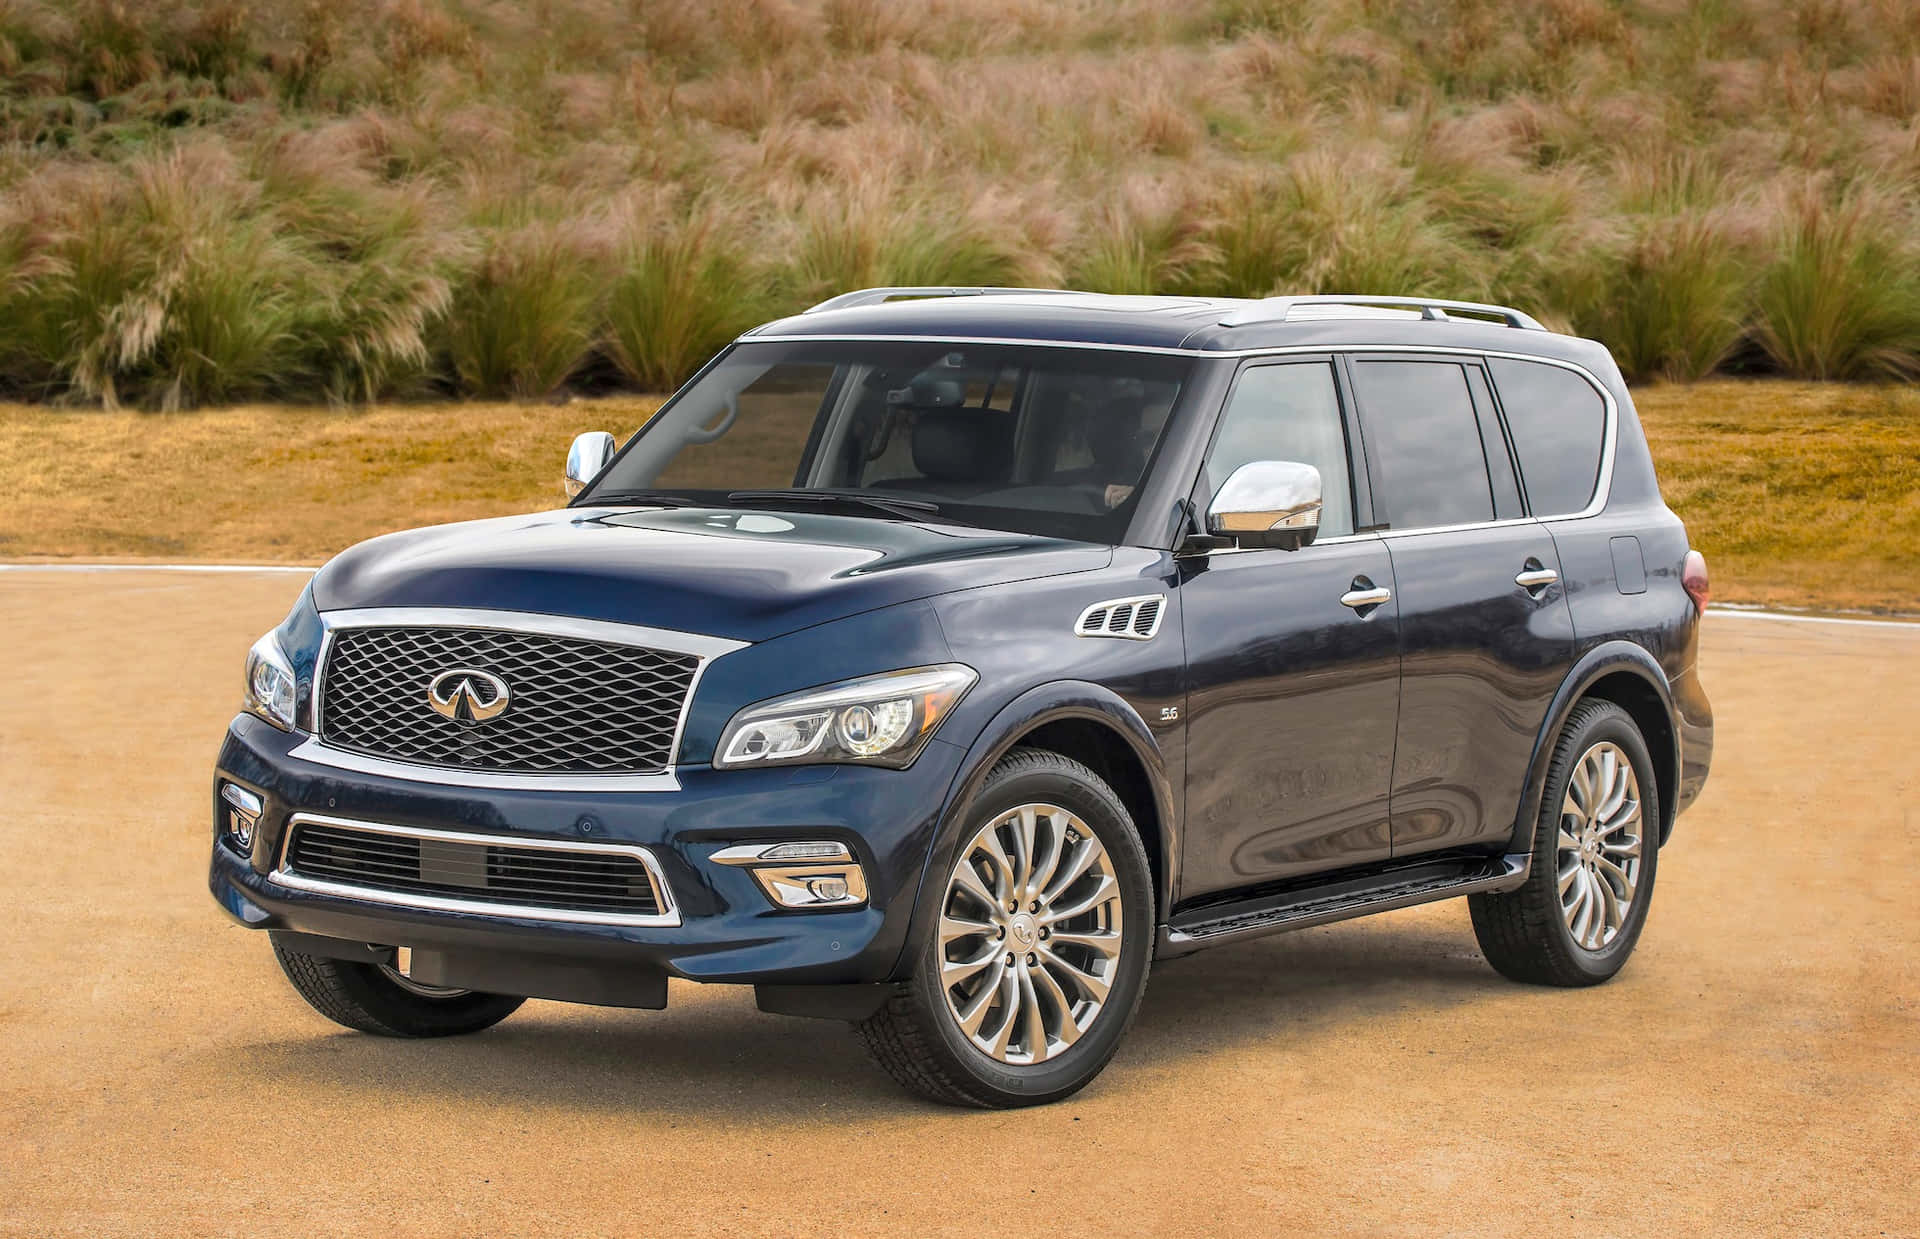 Sleek and Luxurious Infiniti QX80 on the Road Wallpaper